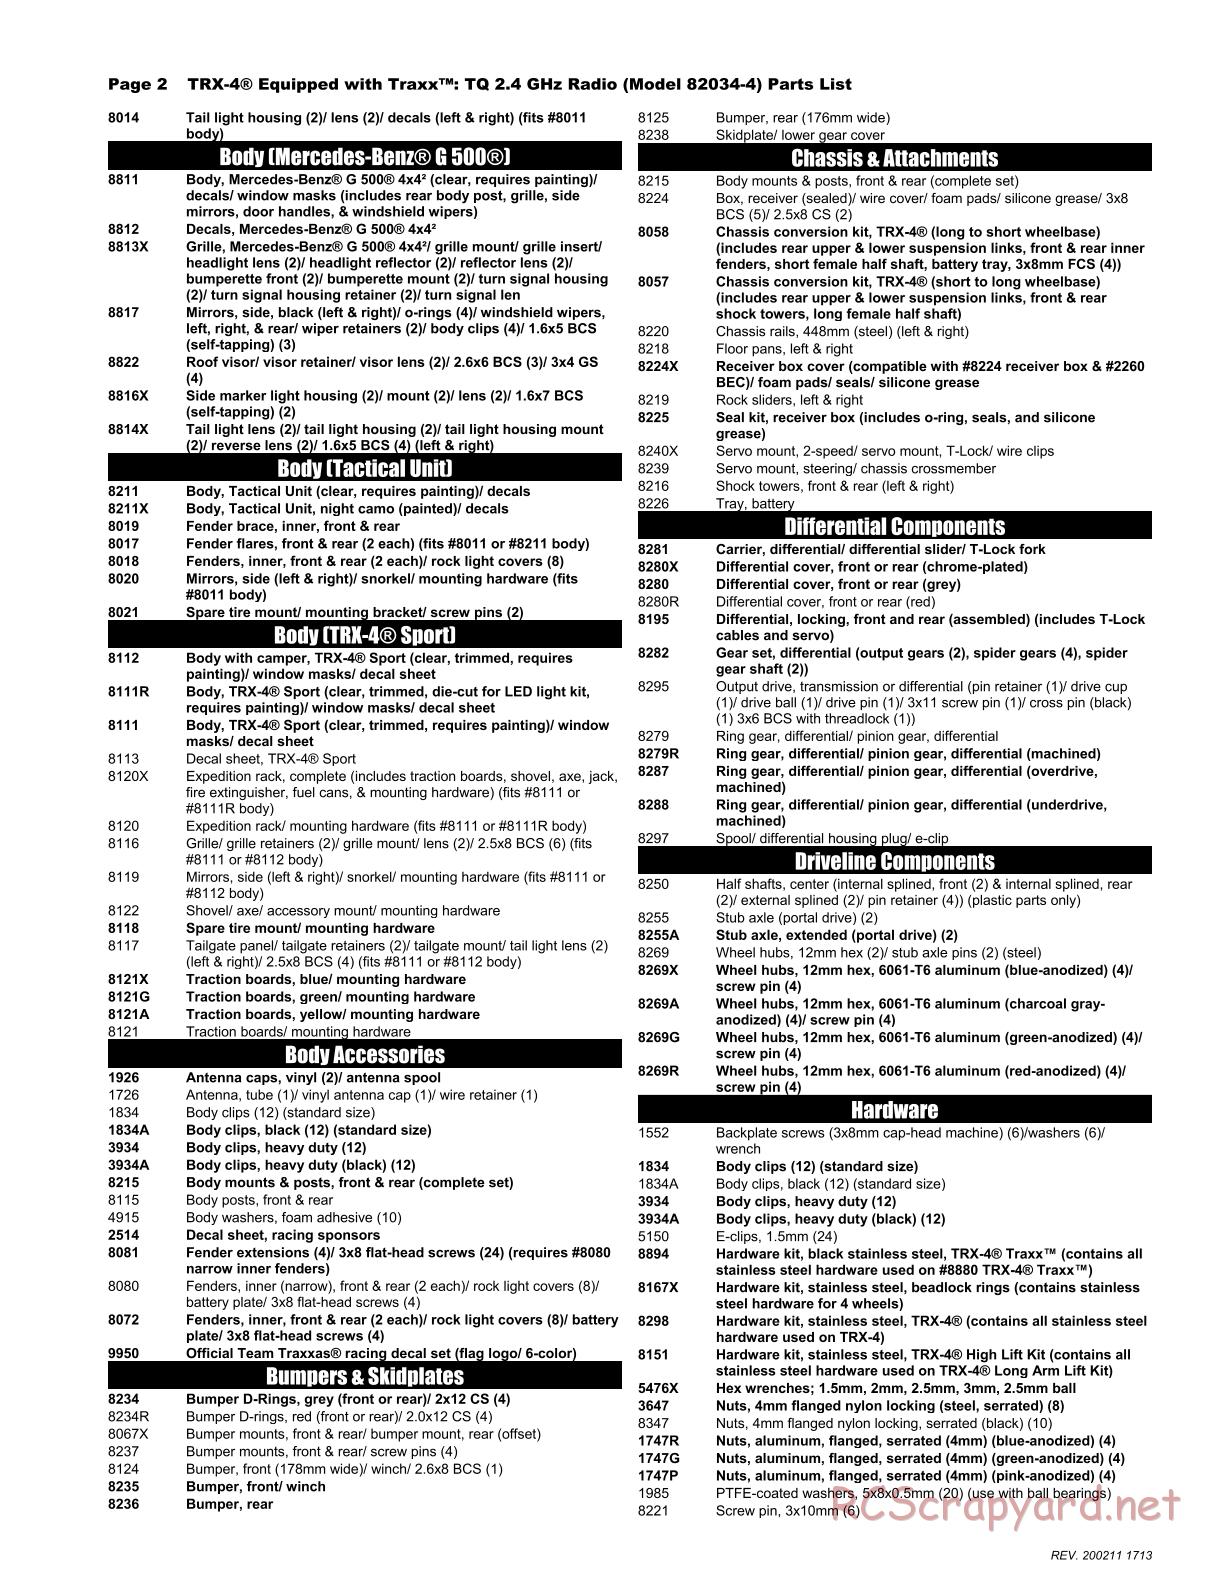 Traxxas - TRX-4 Equipped with Traxx - Parts List - Page 2